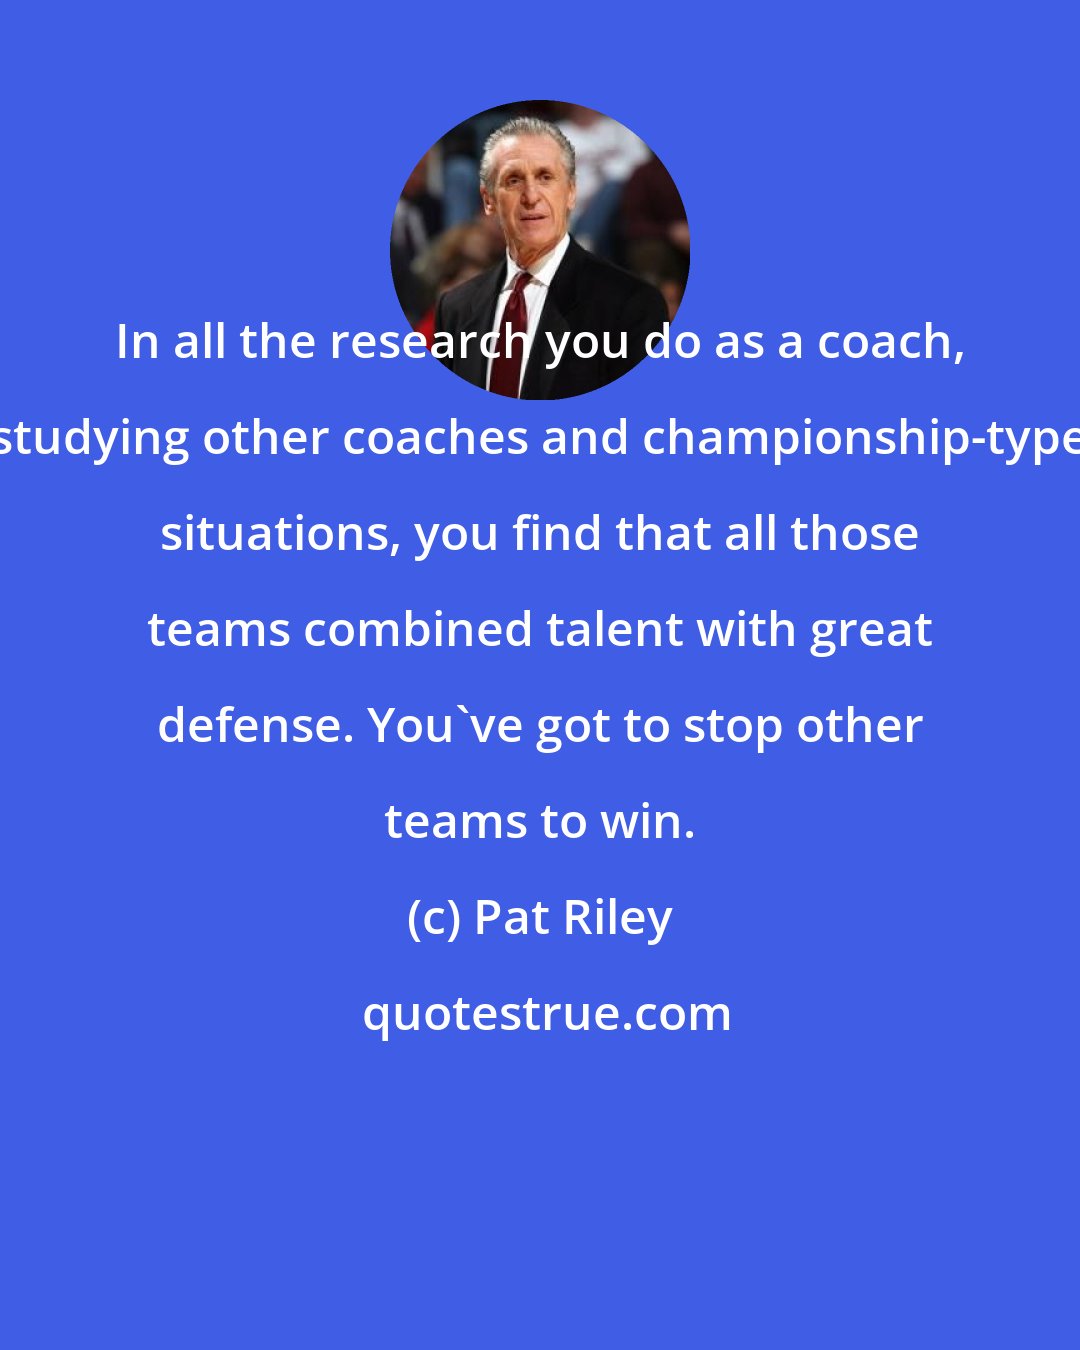 Pat Riley: In all the research you do as a coach, studying other coaches and championship-type situations, you find that all those teams combined talent with great defense. You've got to stop other teams to win.